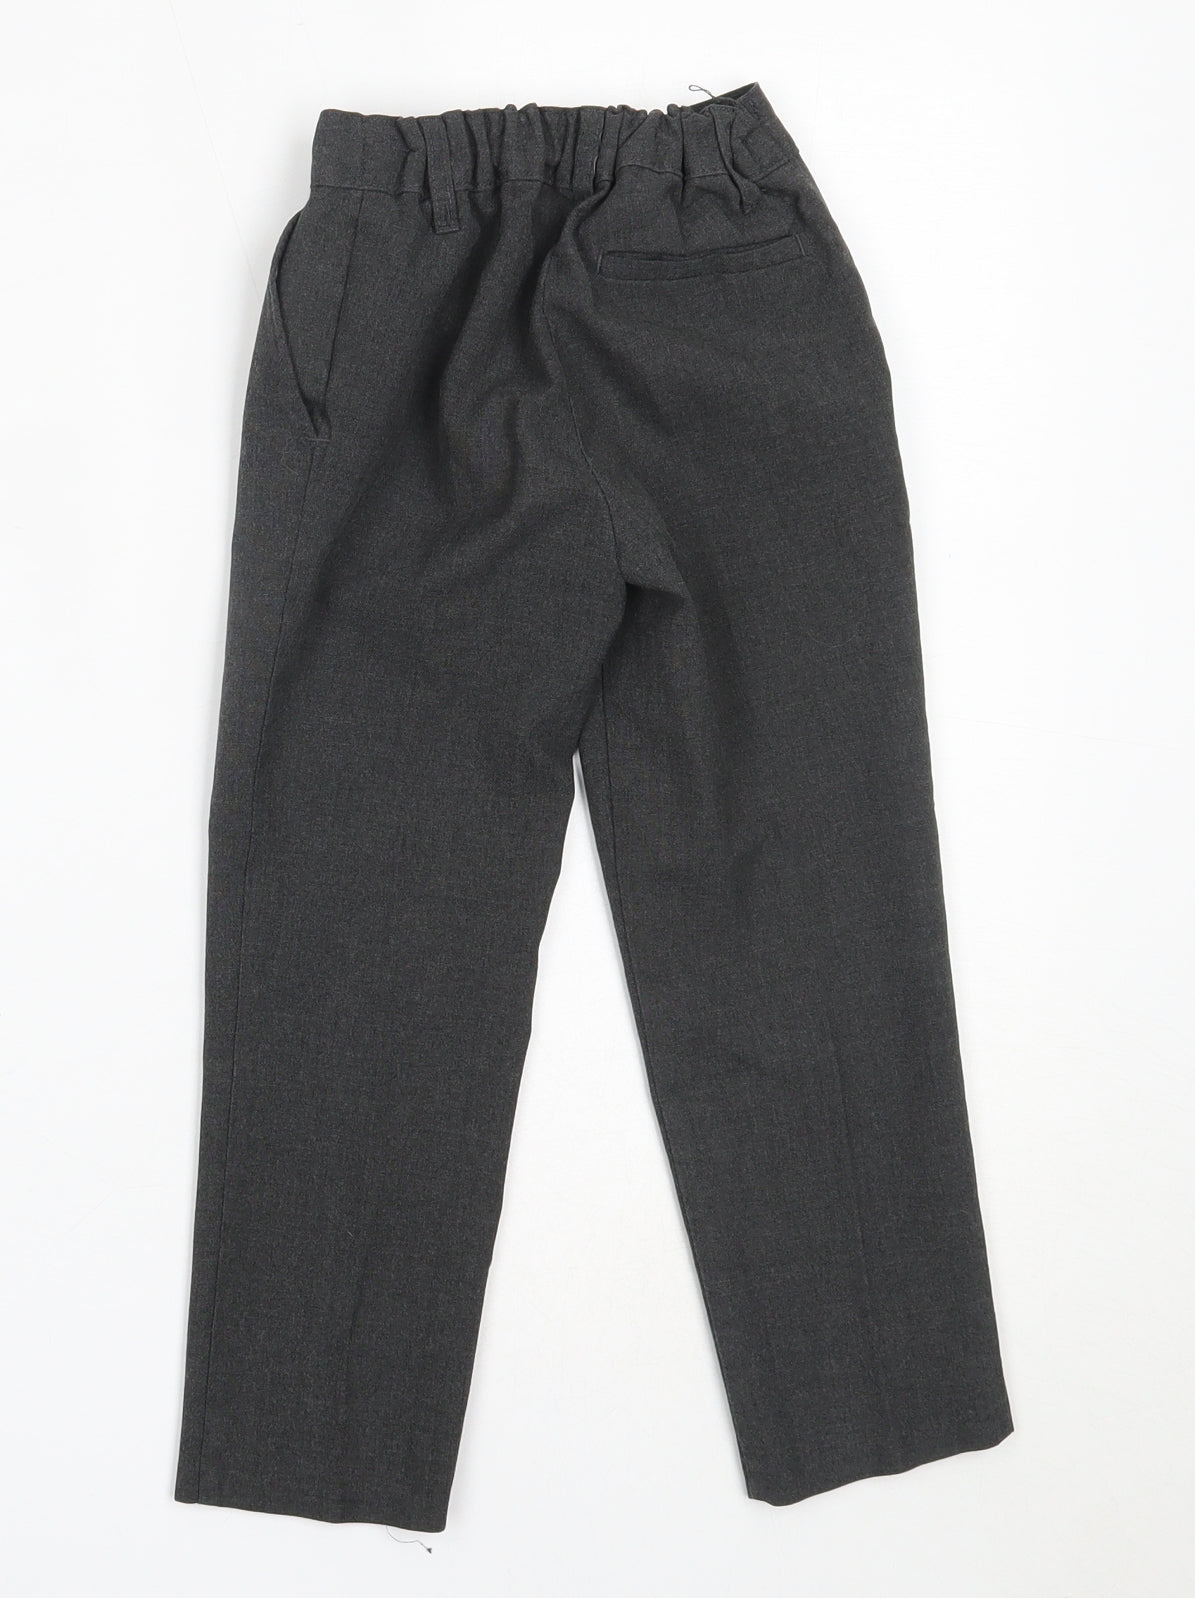 Marks and Spencer Boys Grey  Polyester Dress Pants Trousers Size 3-4 Years  Regular  - school